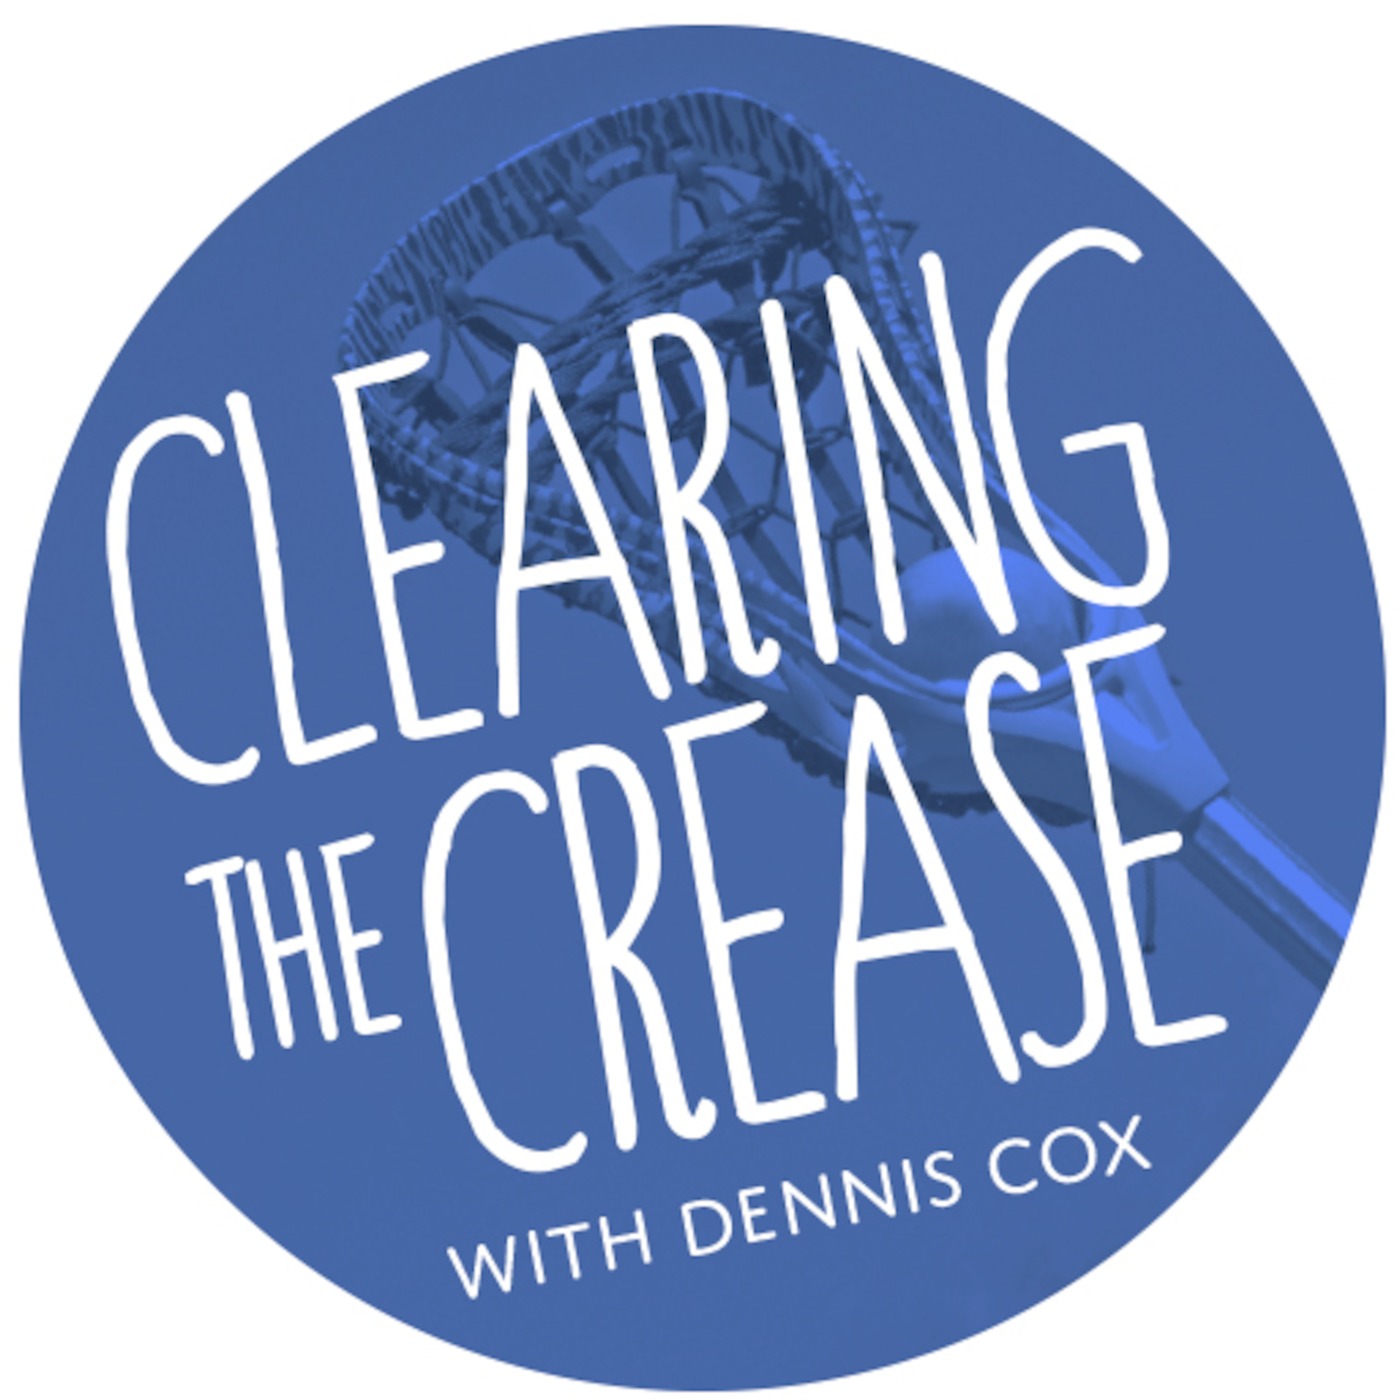 Clearing the Crease with Dennis Cox